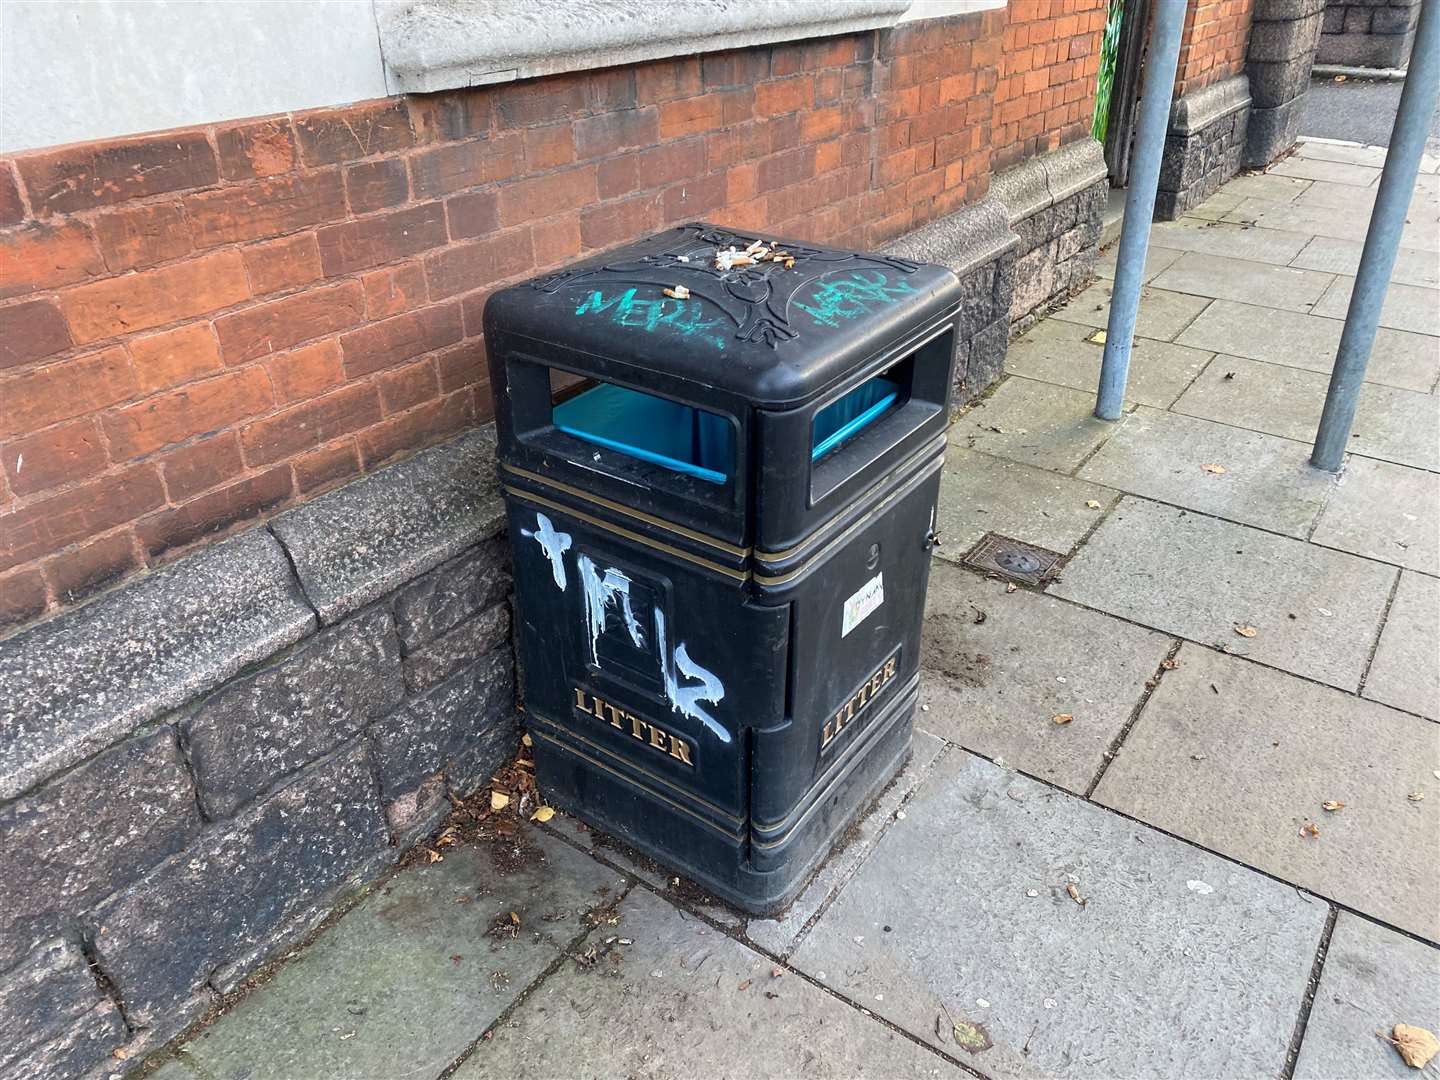 Bins in Faversham town centre have also been targeted by graffiti louts